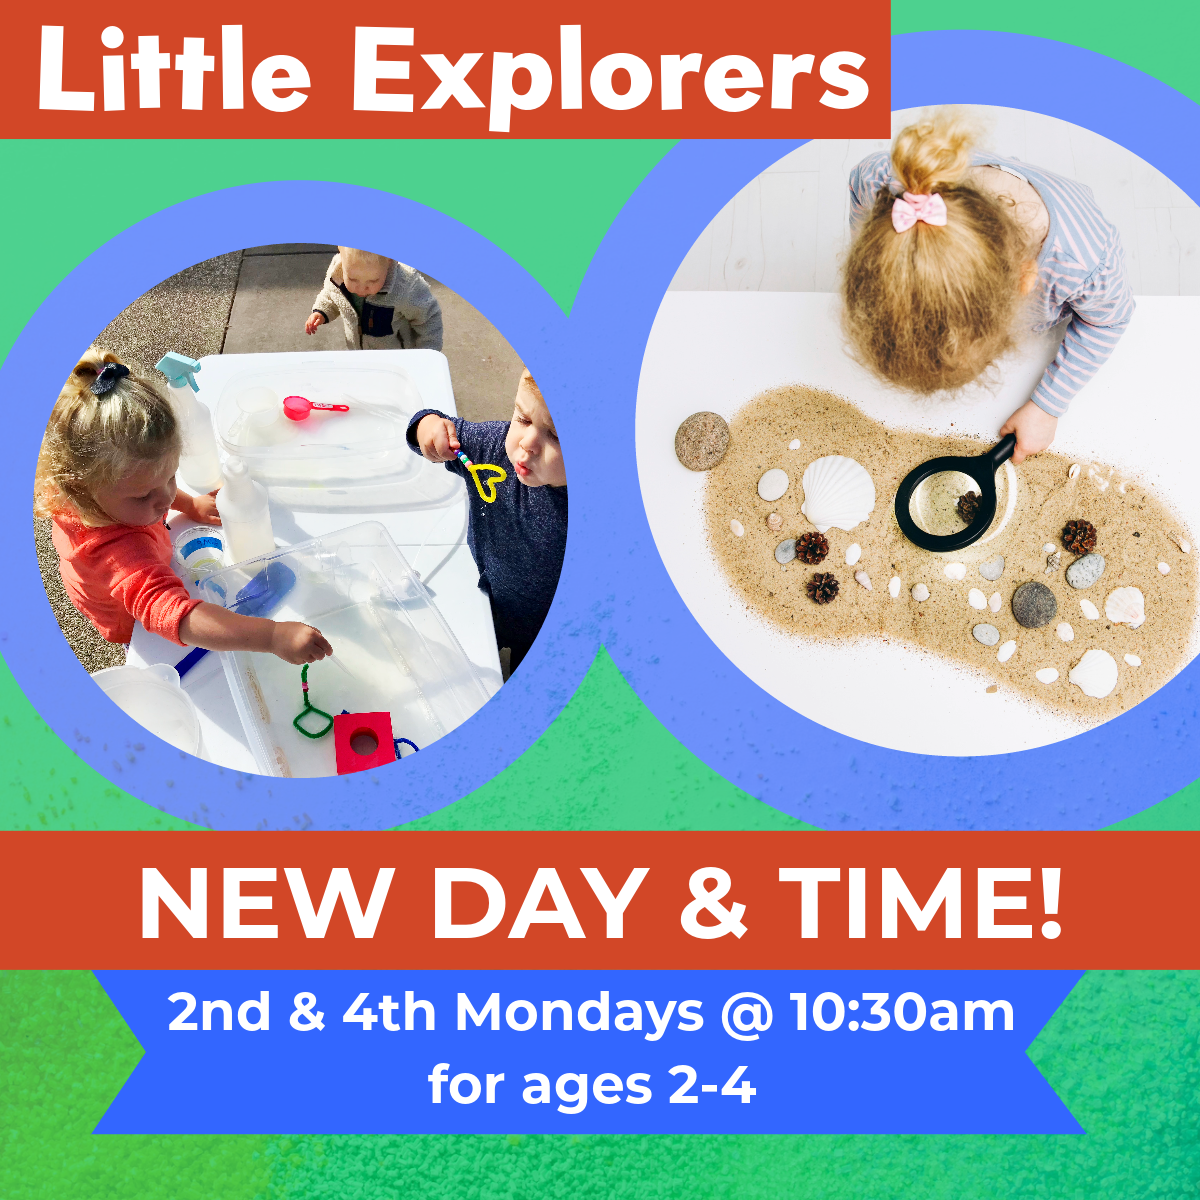 Little Explorers, with new day and time. 2nd and 4th Mondays at 10:30am.